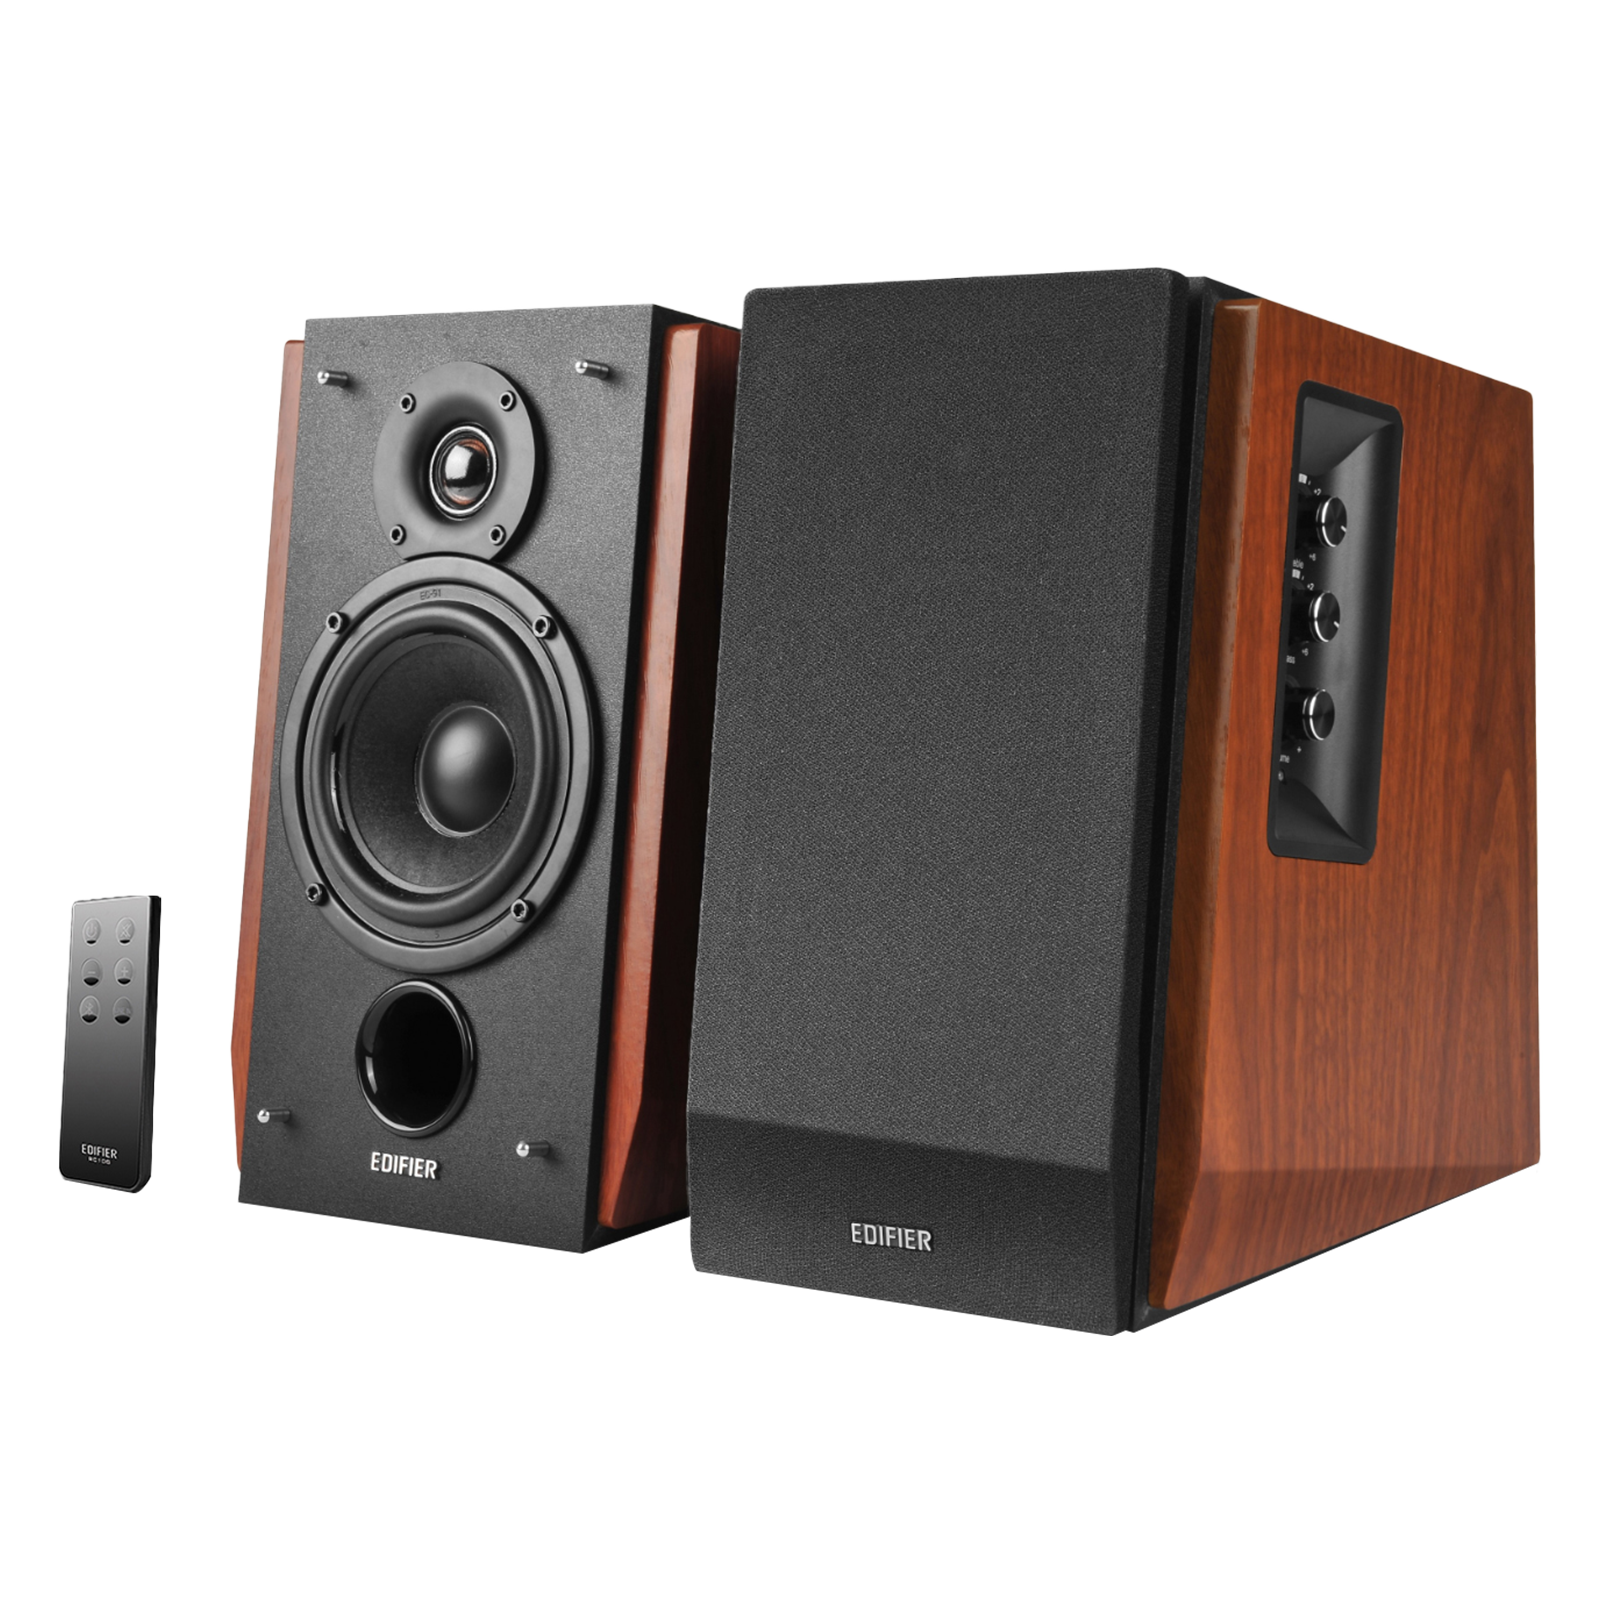 R1700BT Multifunctional speakers for your everyday needs